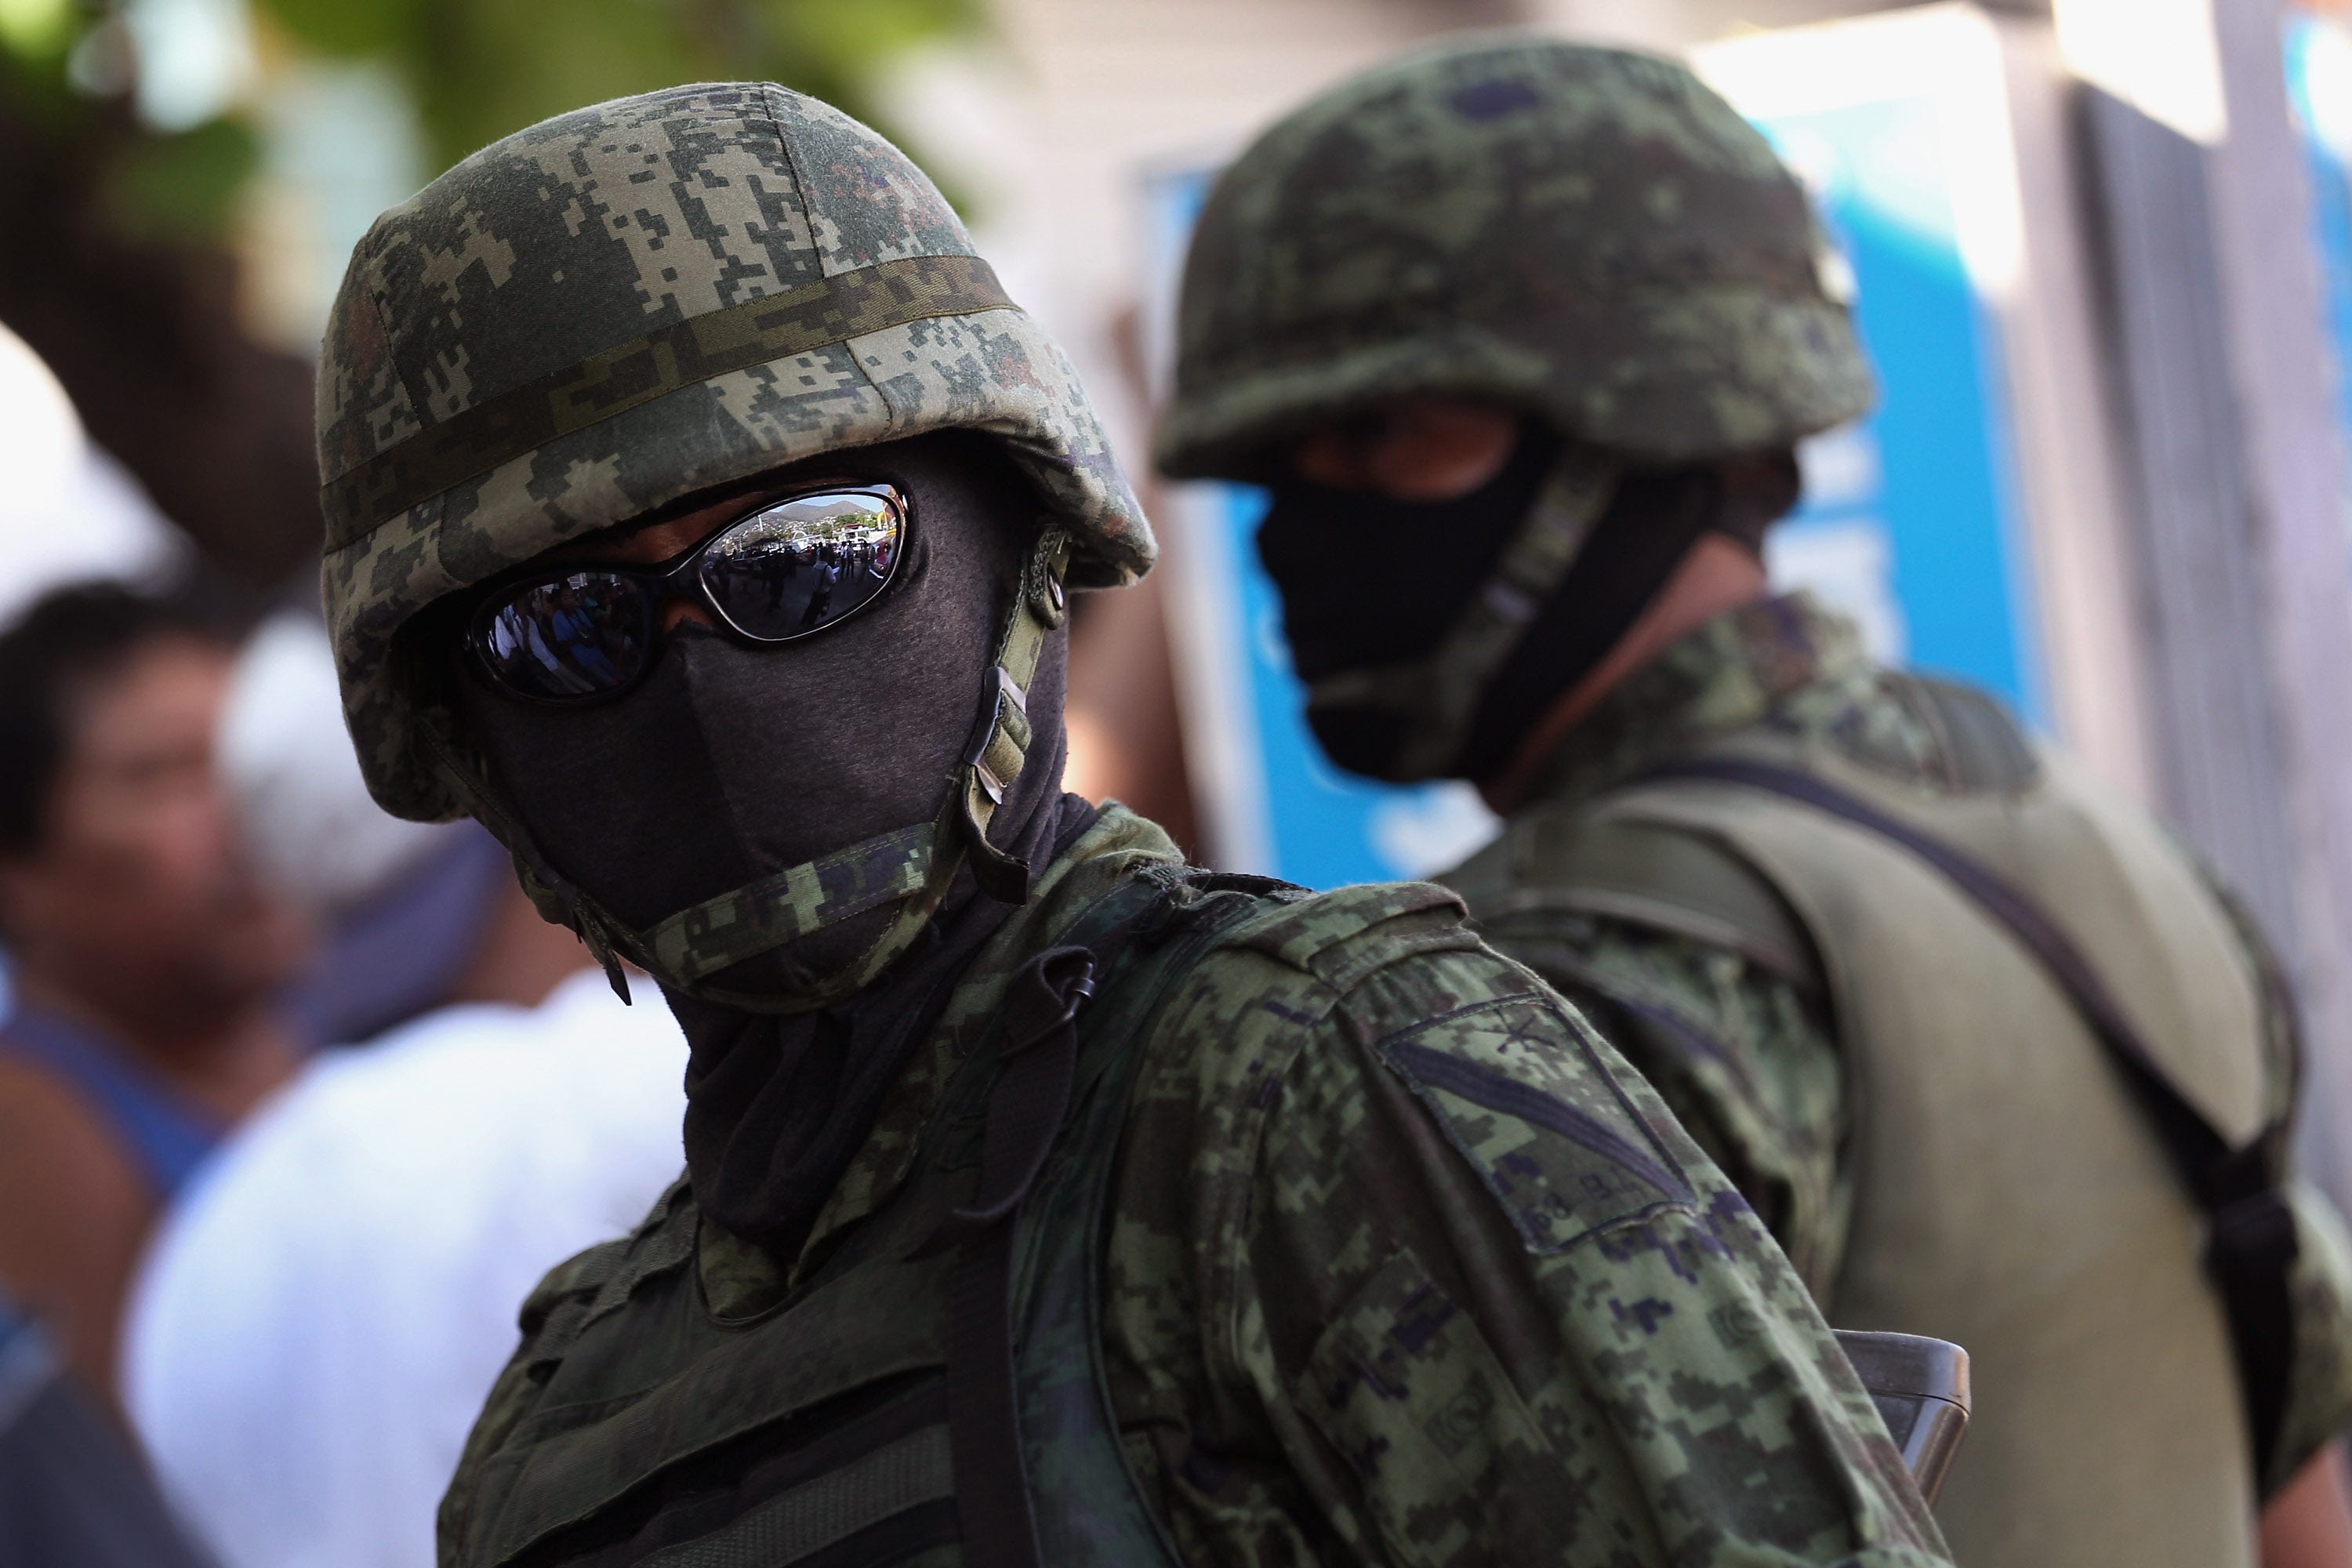 U.S. Armed Forces Spending More Than Ever To Help Train Mexican Military